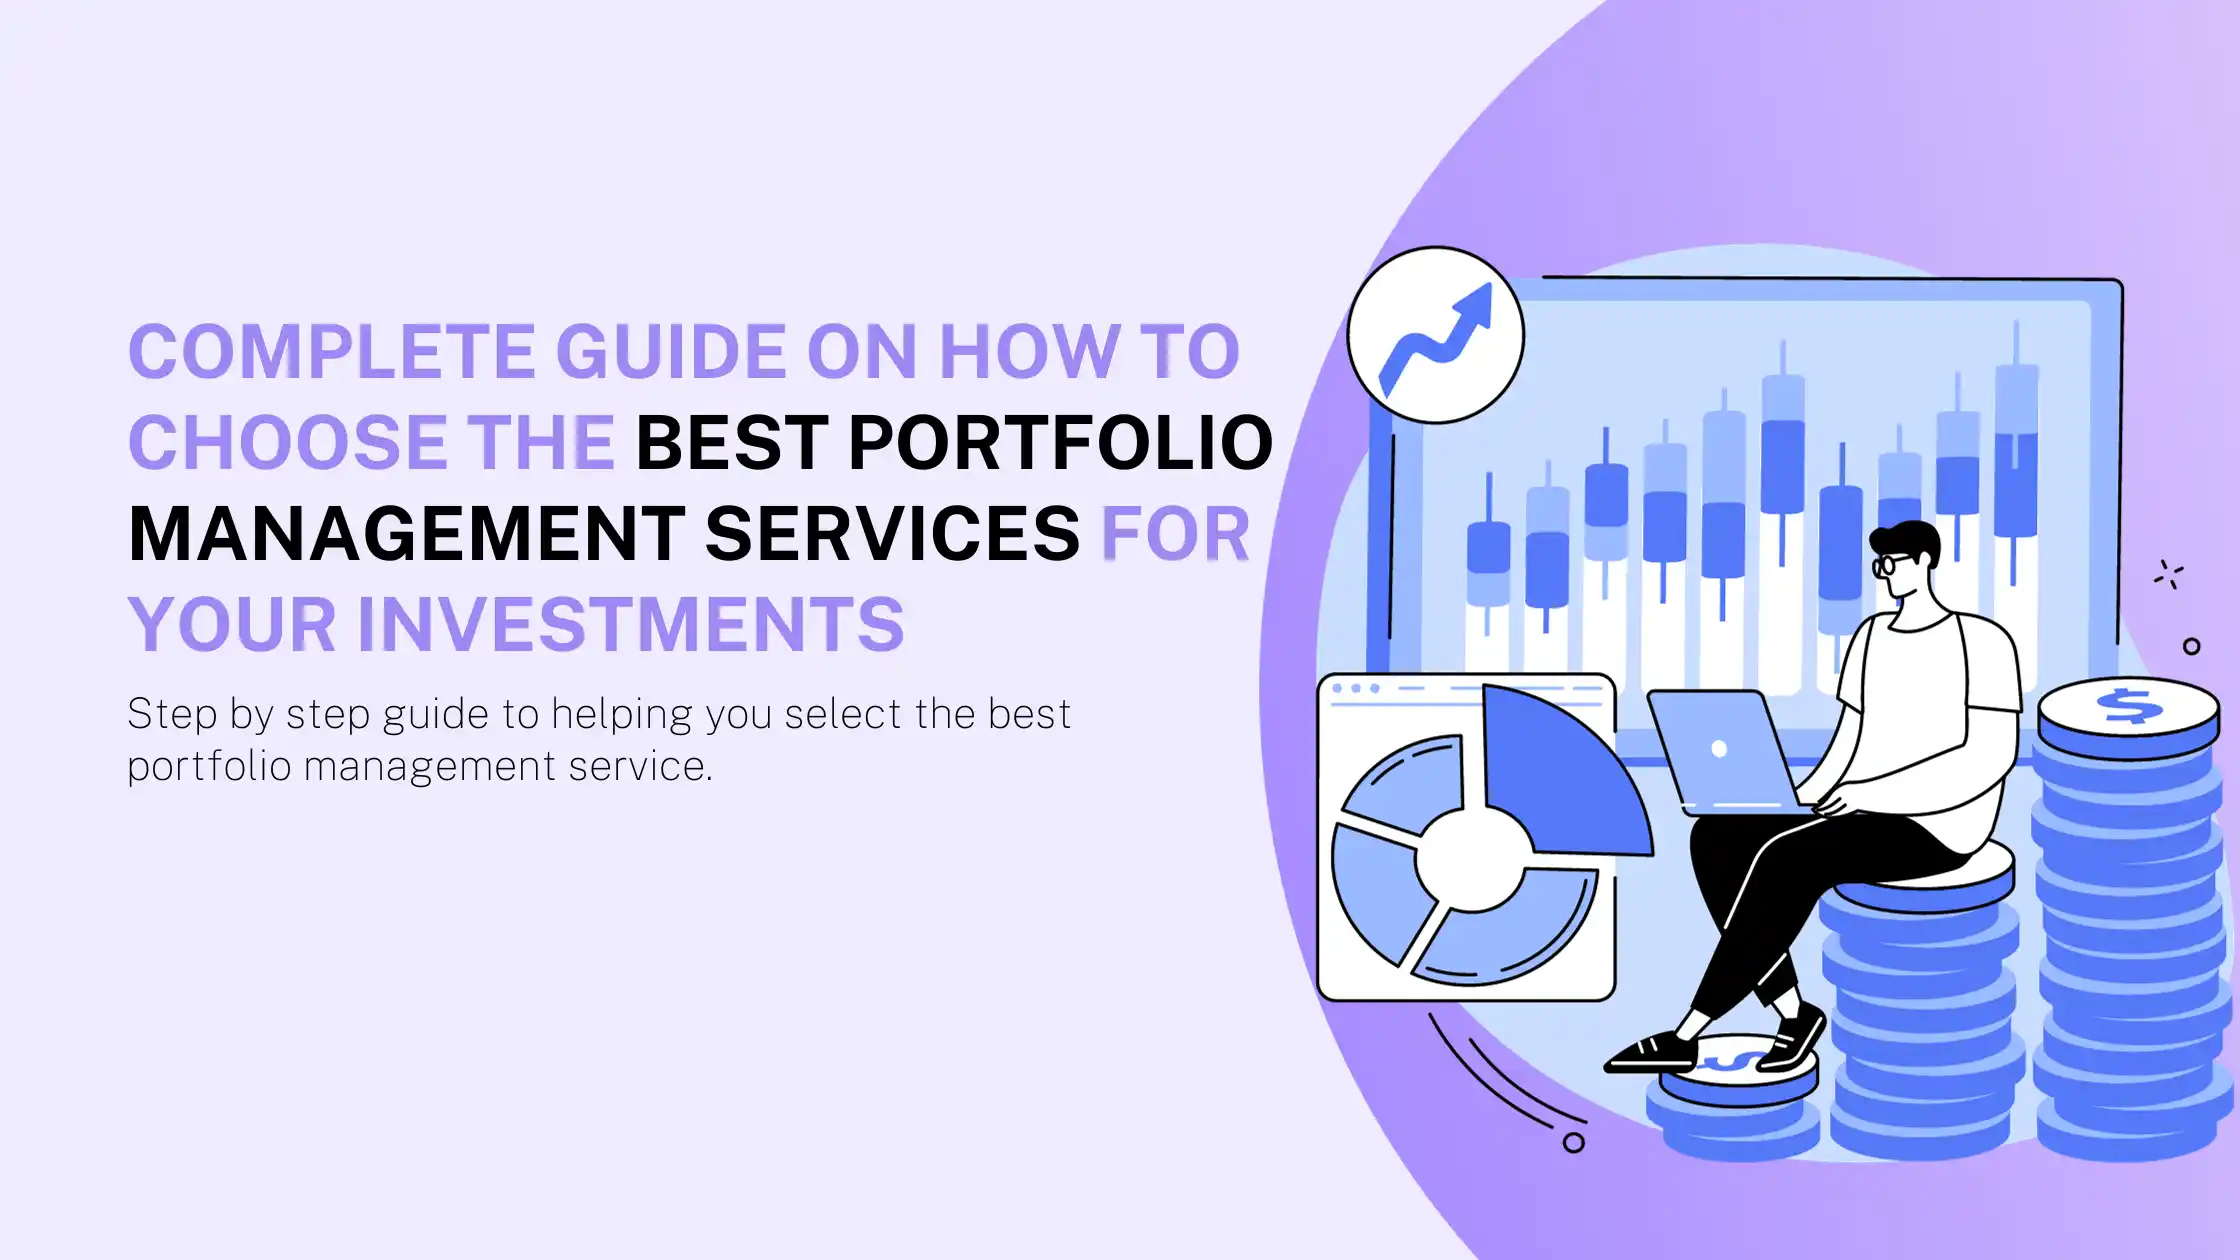 Complete Guide on How to Choose the Best Portfolio Management Services for Your Investments